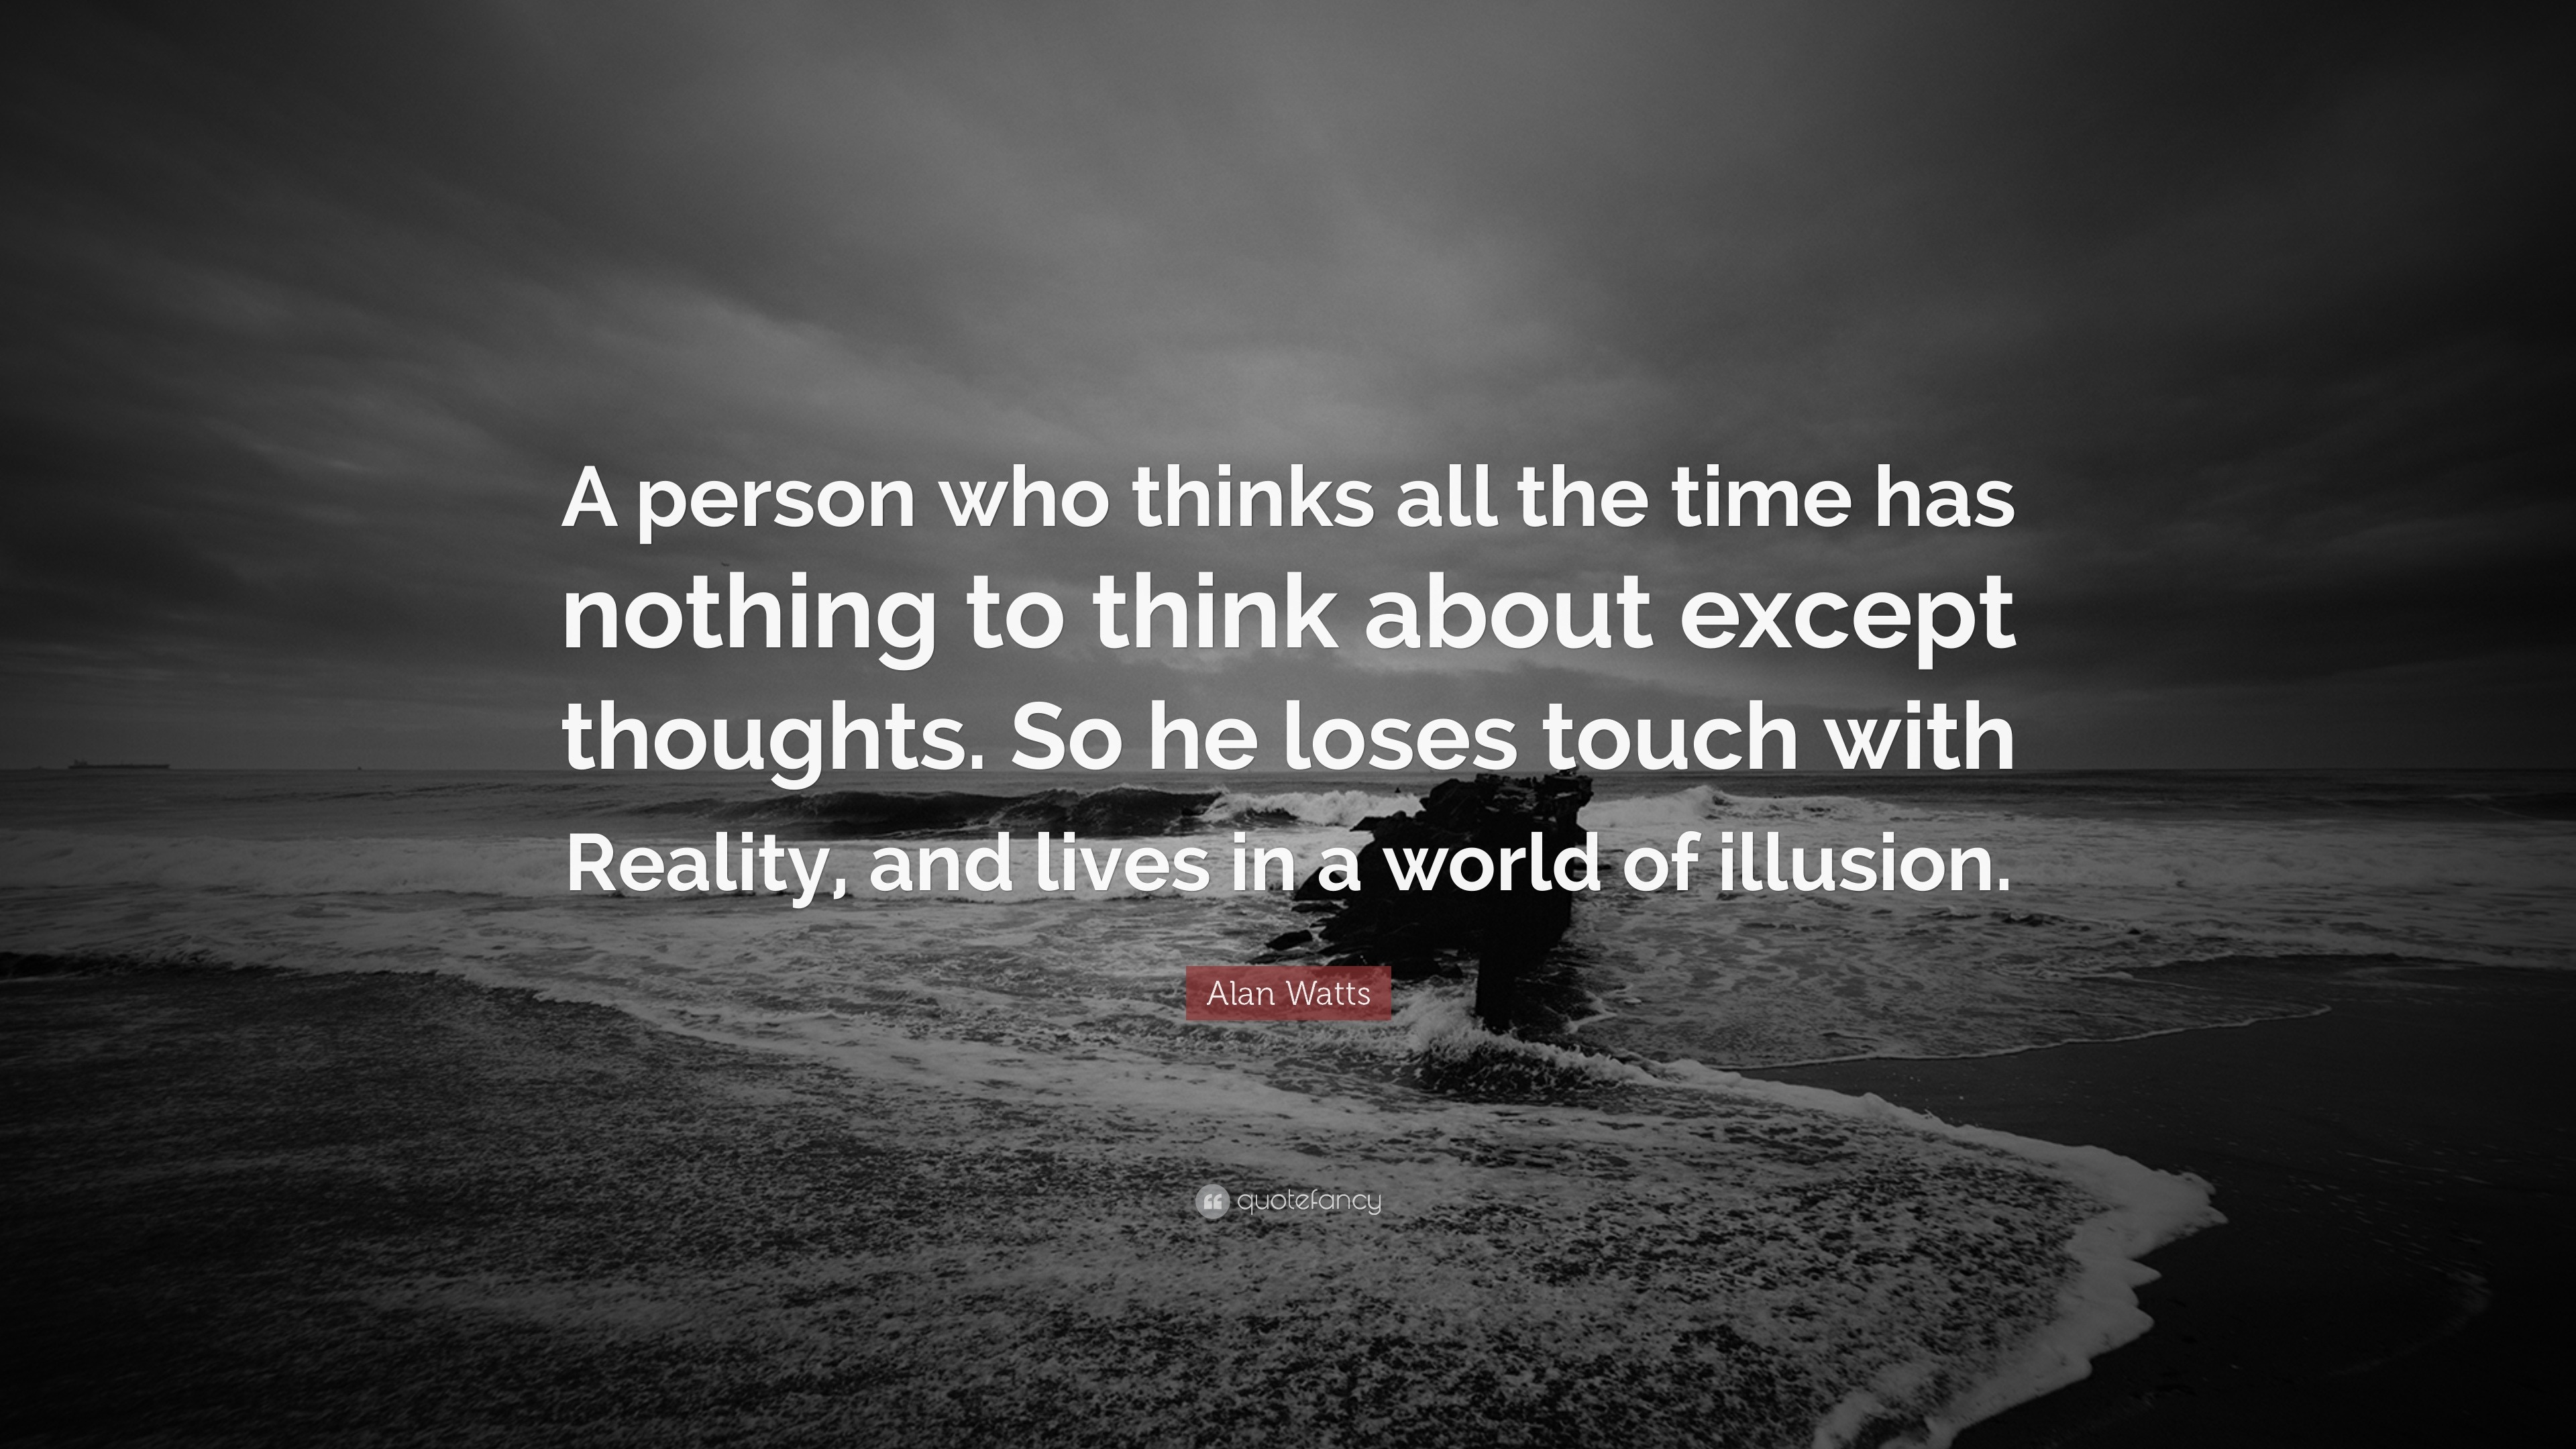 Alan Watts Quote: “A person who thinks all the time has nothing to about except thoughts. So he loses touch with Reality, and lives i...”